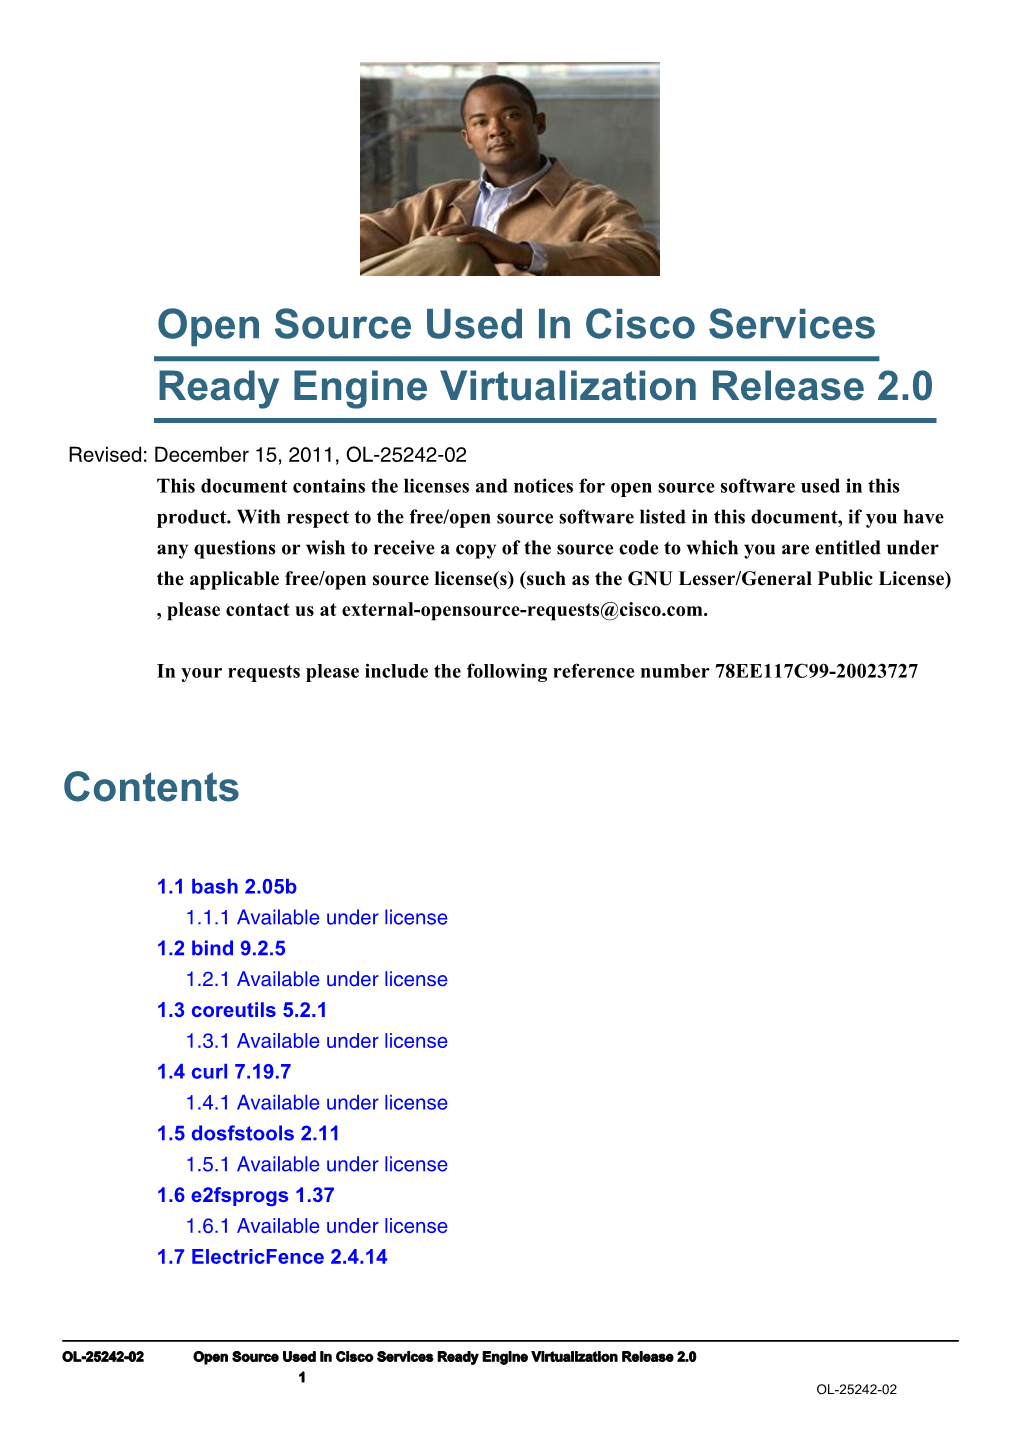 Open Source Used in Cisco Services Ready Engine Virtualization Release 2.0